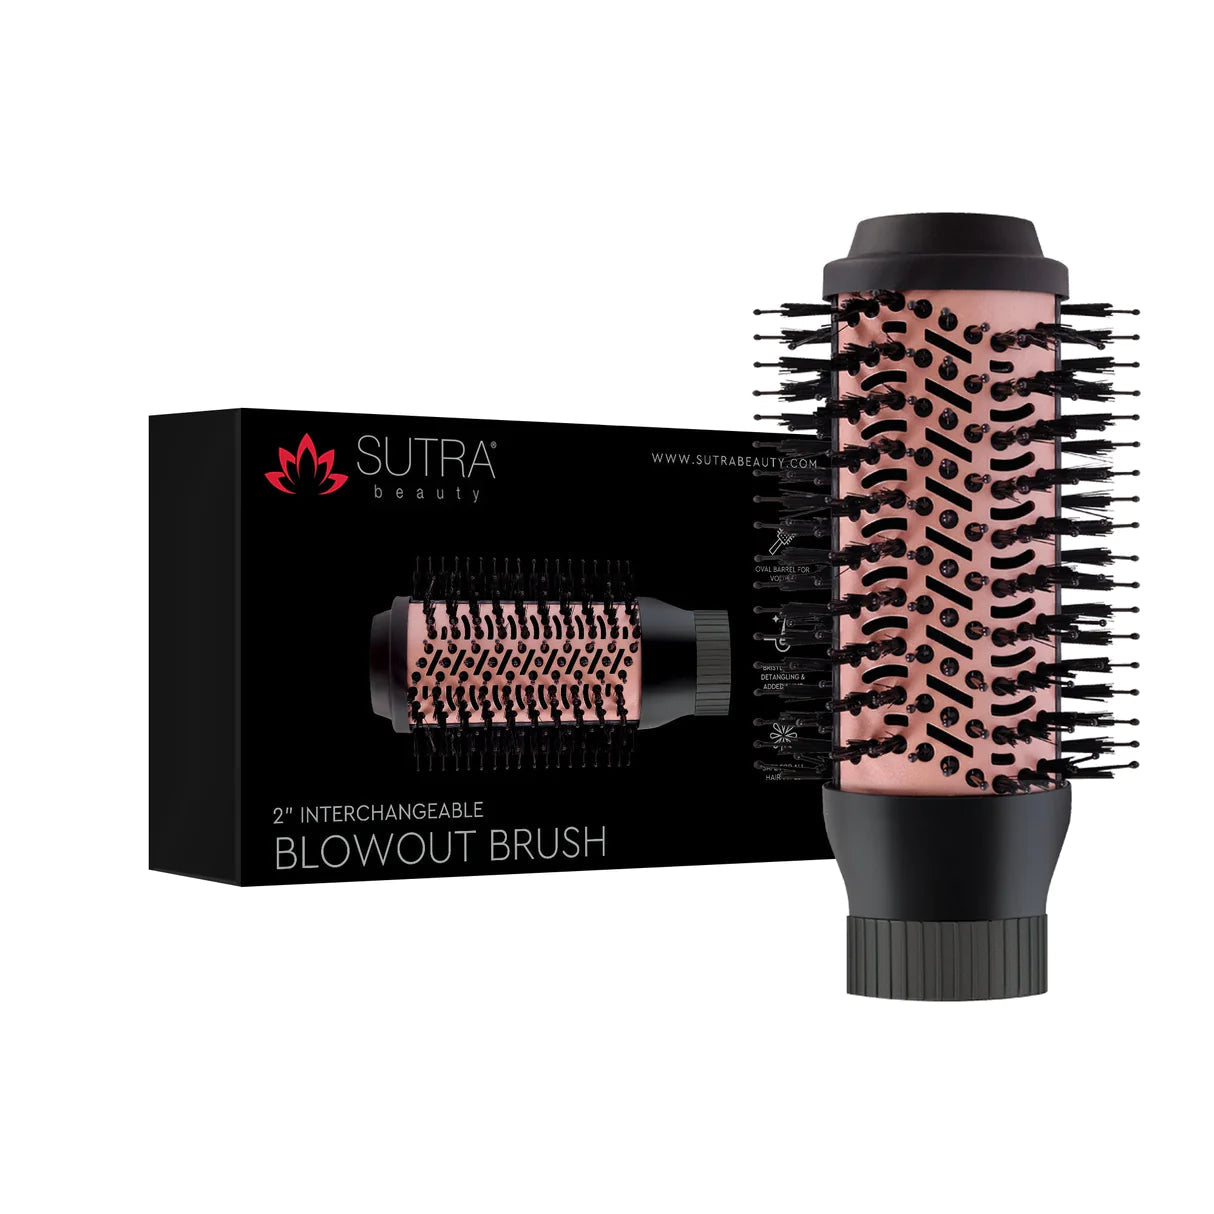 KIT SUTRA INTERCHANGEABLE BLOWOUT BRUSH SET 1"+2"+3" - ROSE GOLD